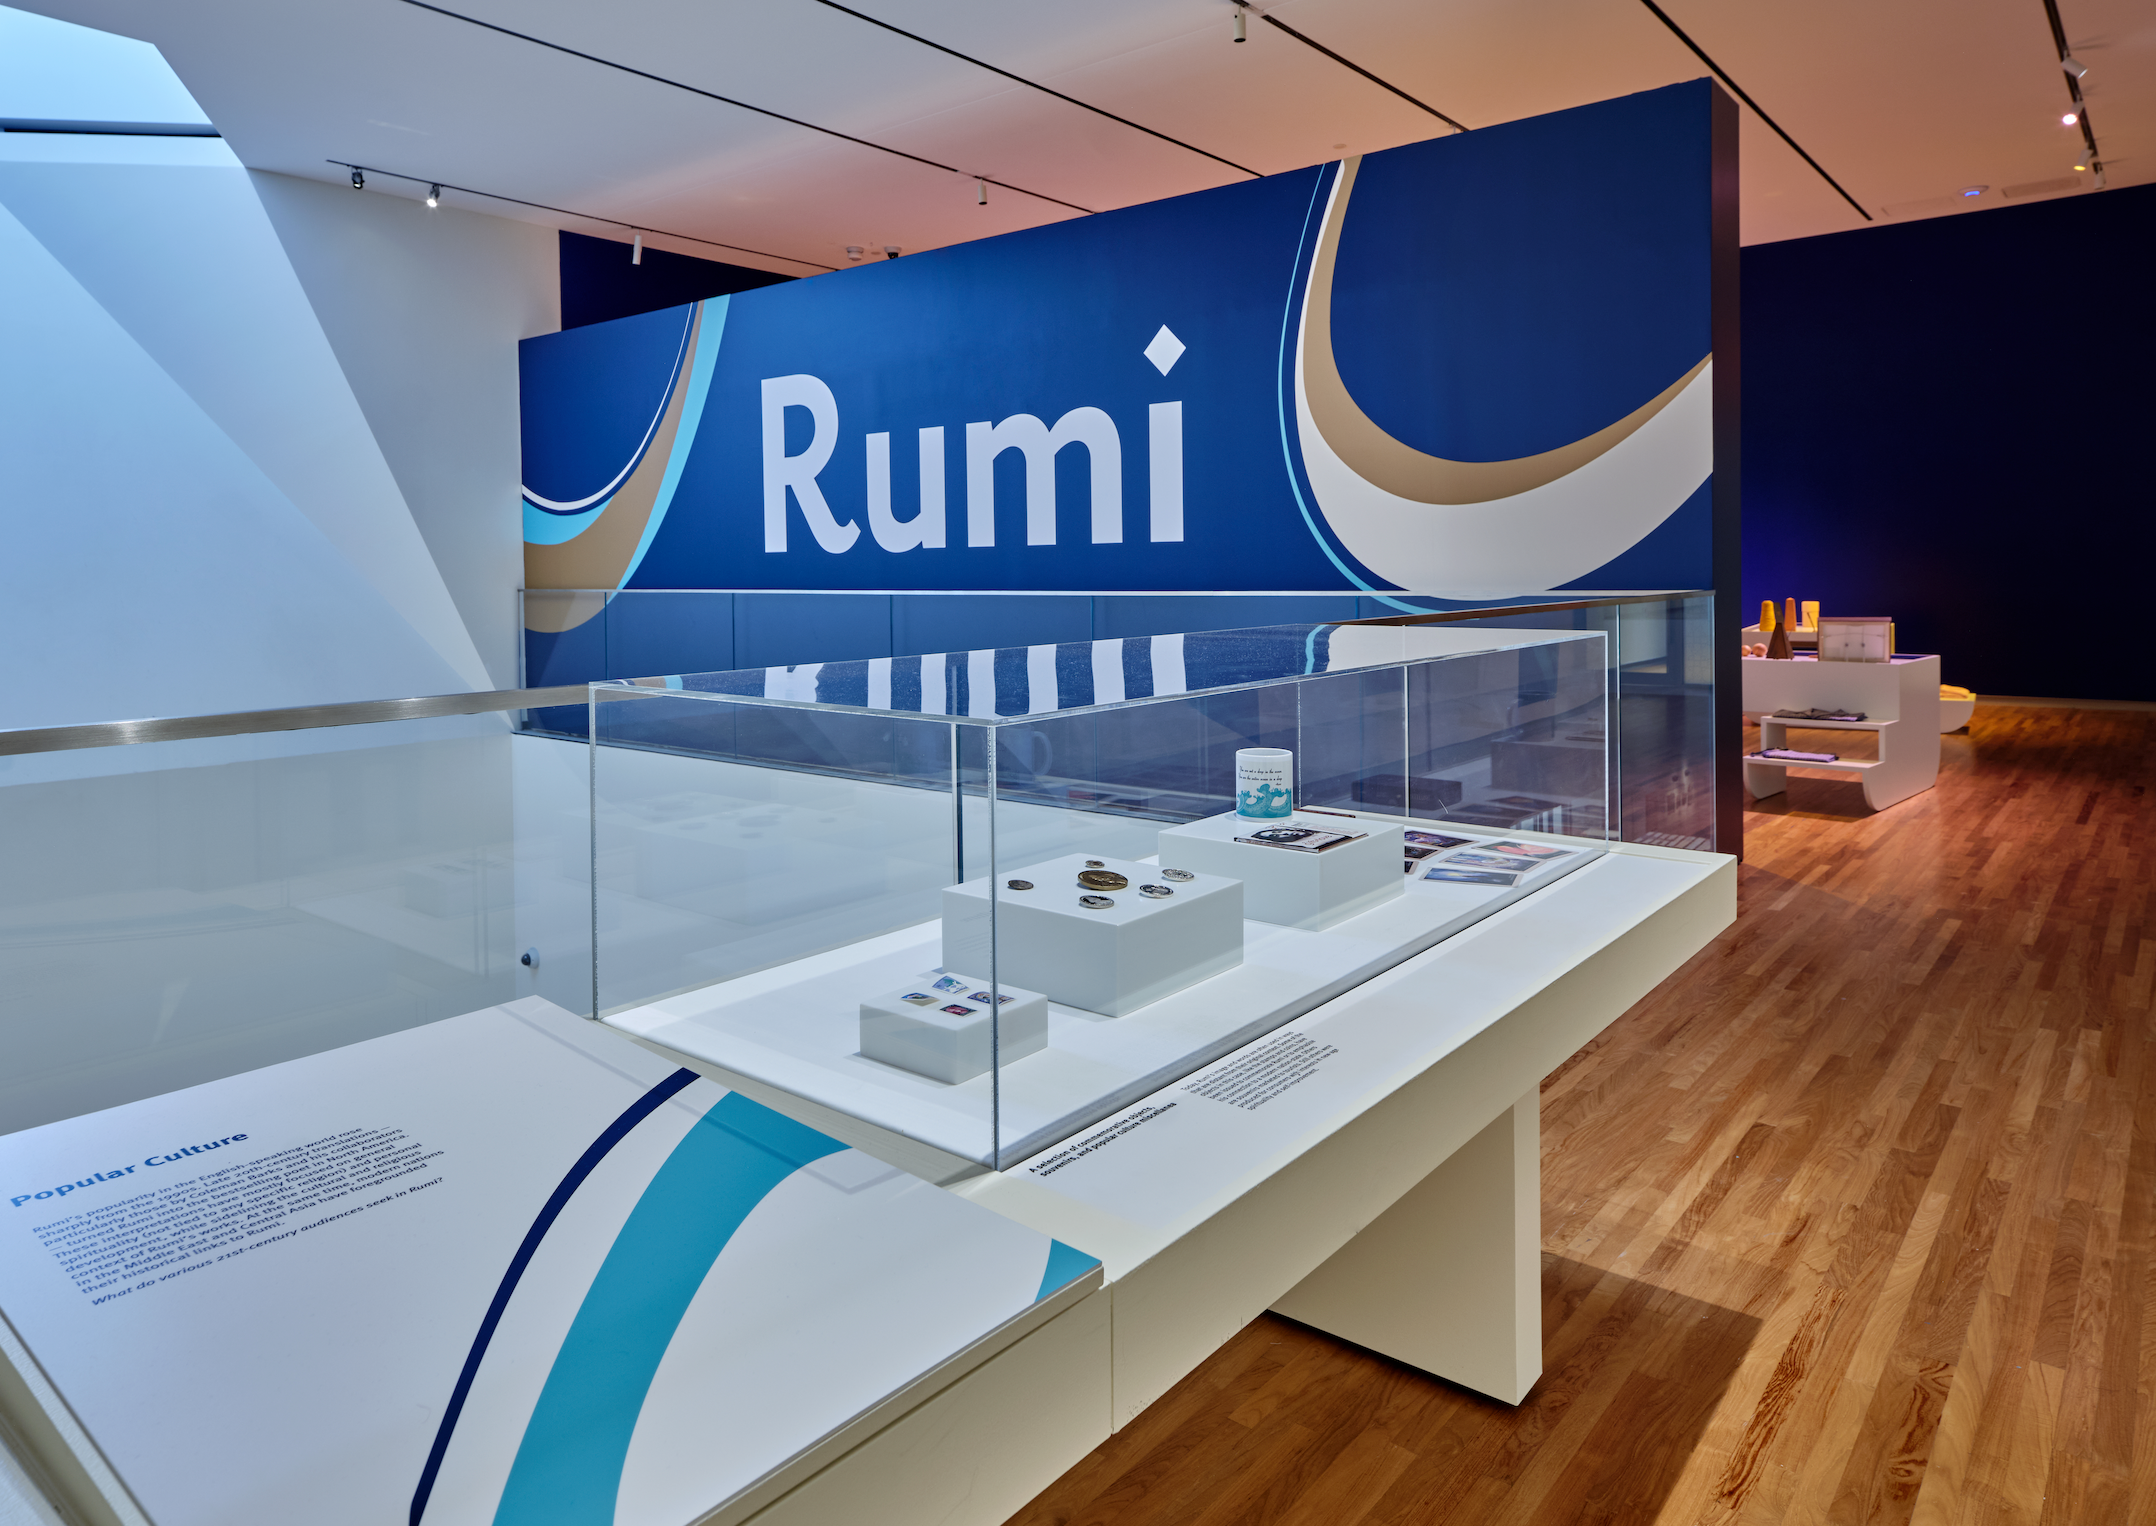 Rumi-inspired items on display with the exhibition's banner on the background that says 